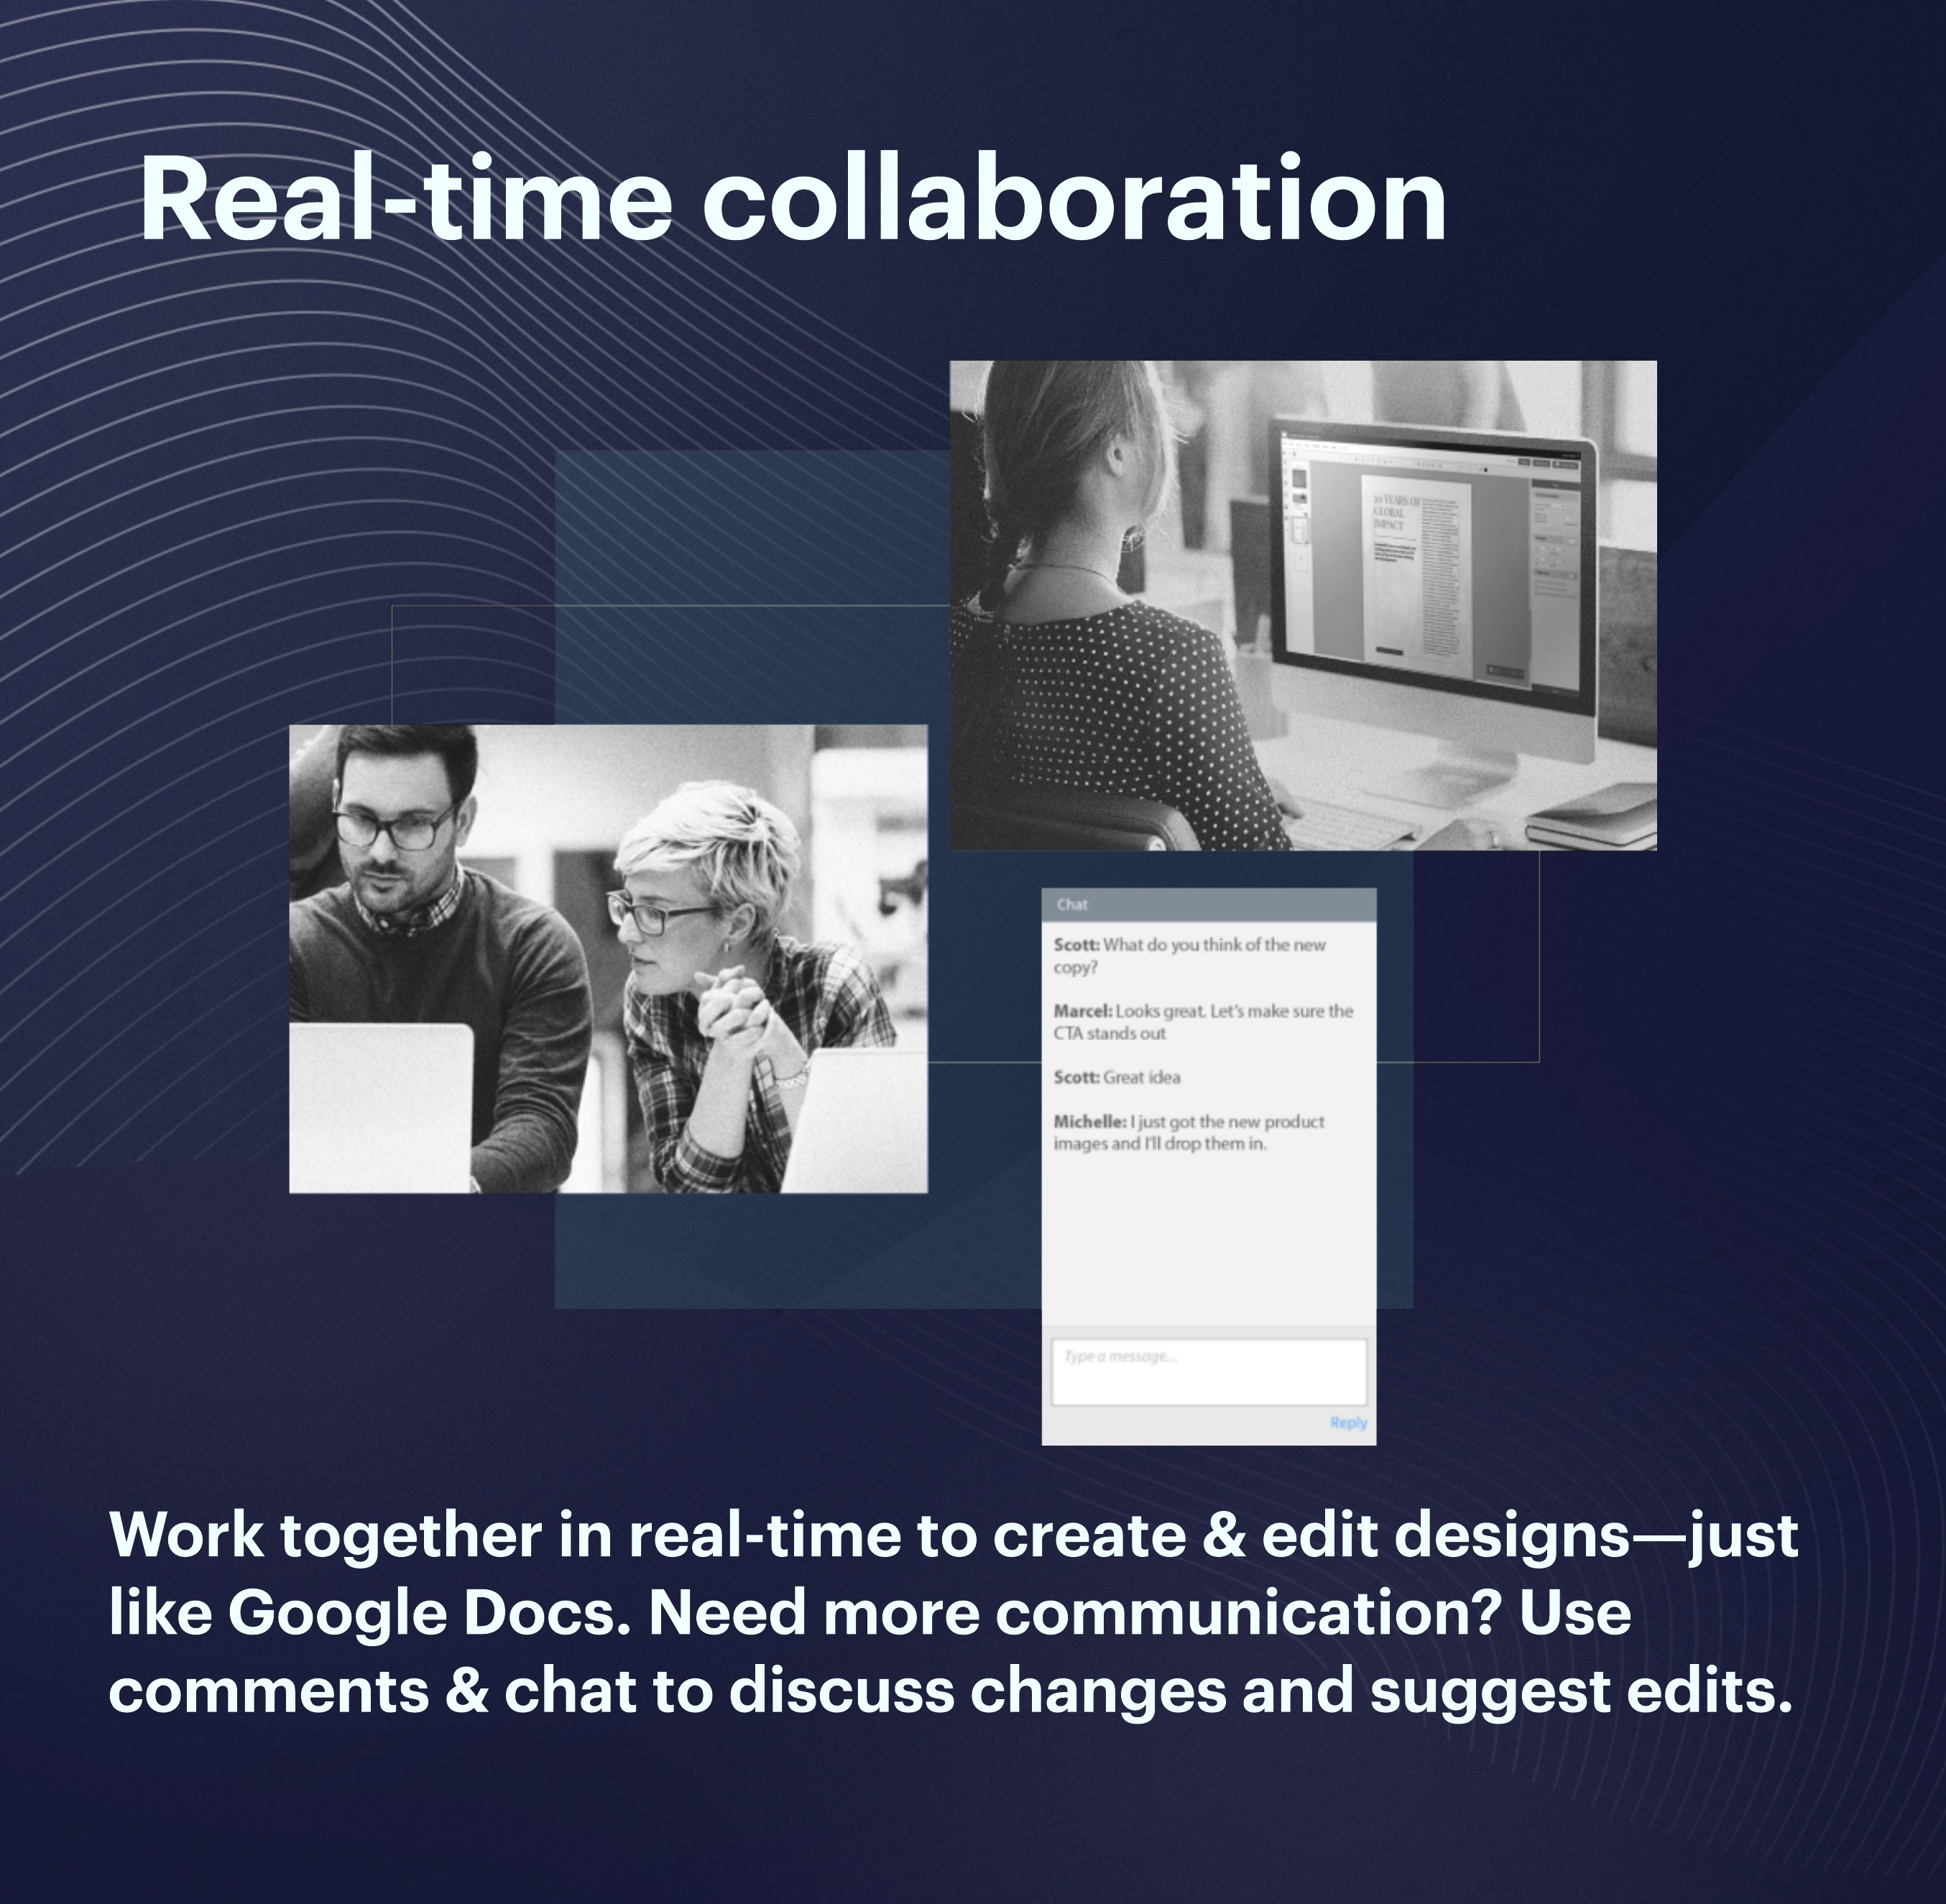 Marq Software - Work together in real-time to create & edit designs - just like Google Docs. Need more communication? Use comments & chat to discuss changes and suggest edits.